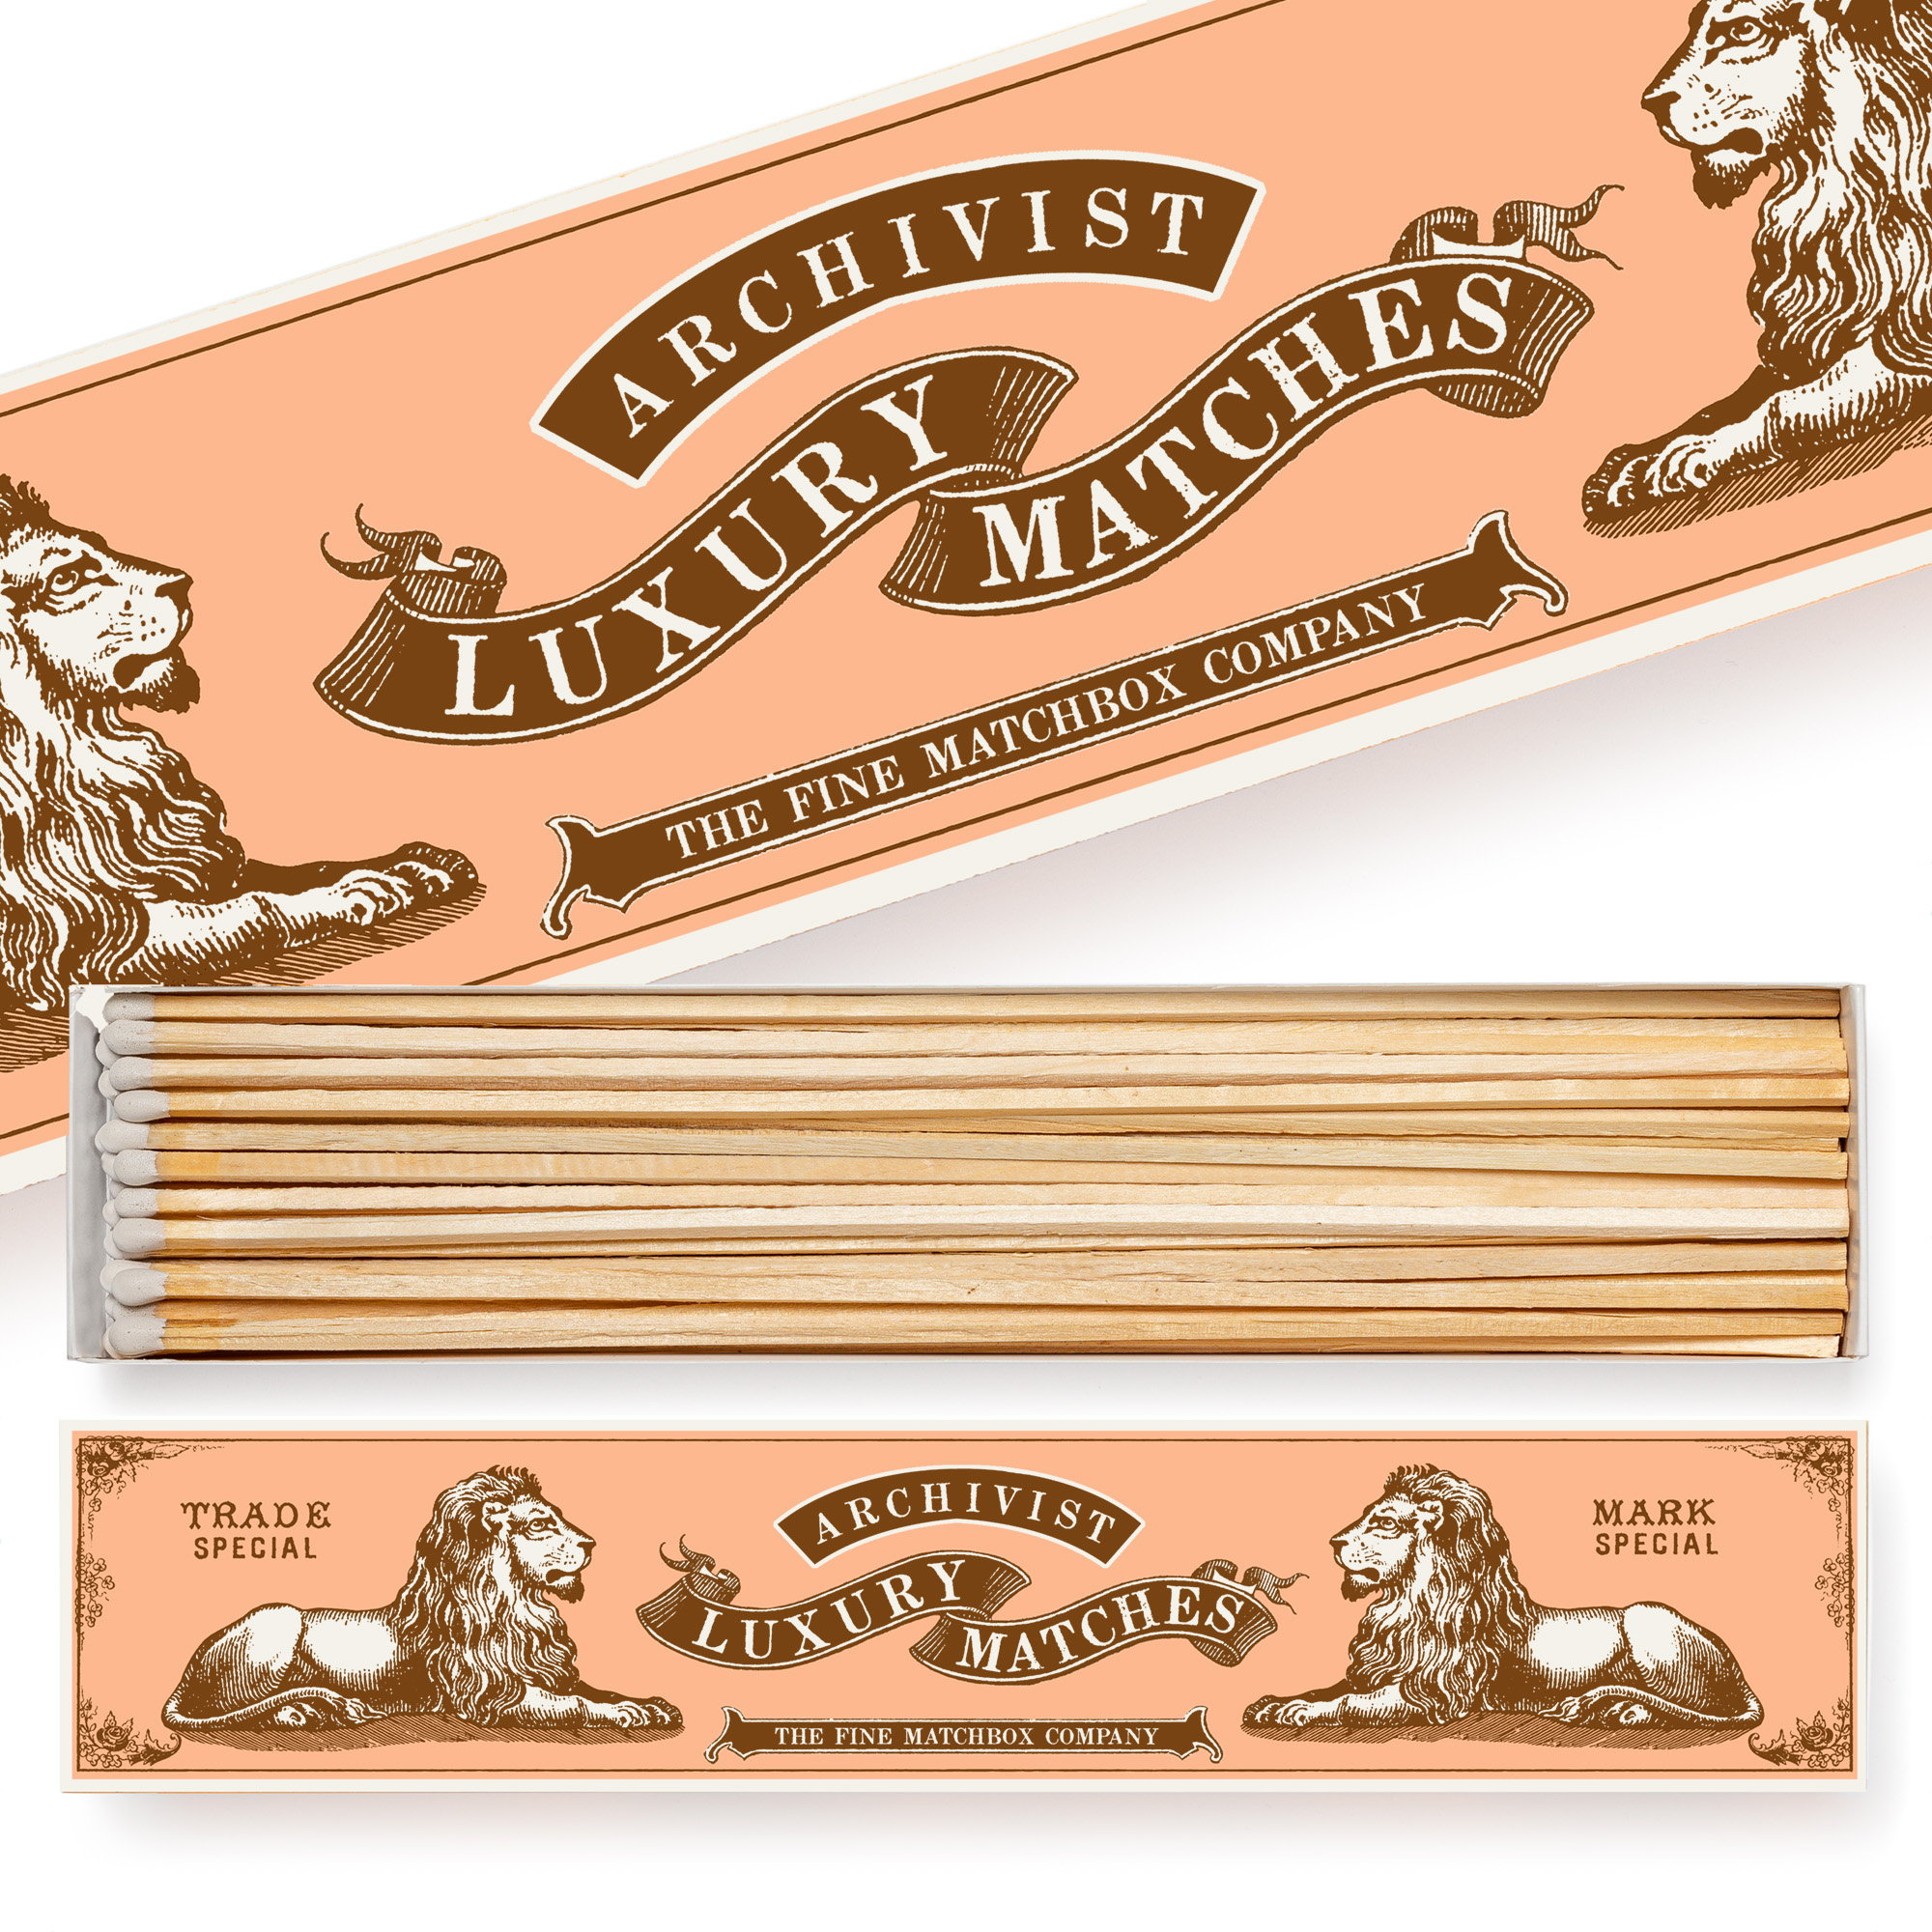 Lions - Long Matchboxes - Archivist - from Archivist Gallery 